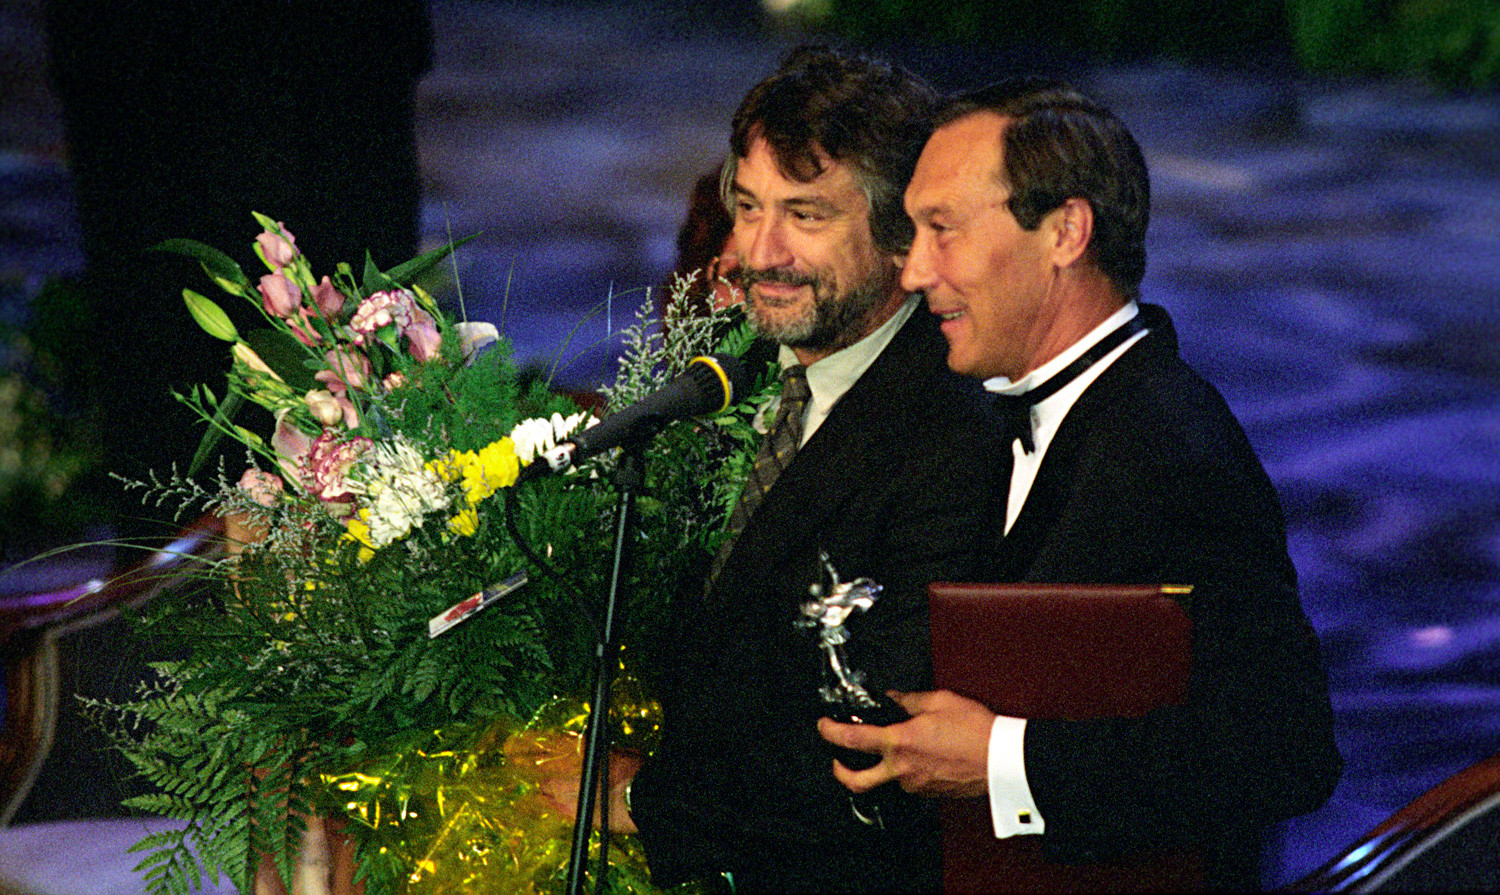 Robert de Niro and Oleg Yankovsky attend the closing ceremony of the 20th Moscow International Film Festival in 1997